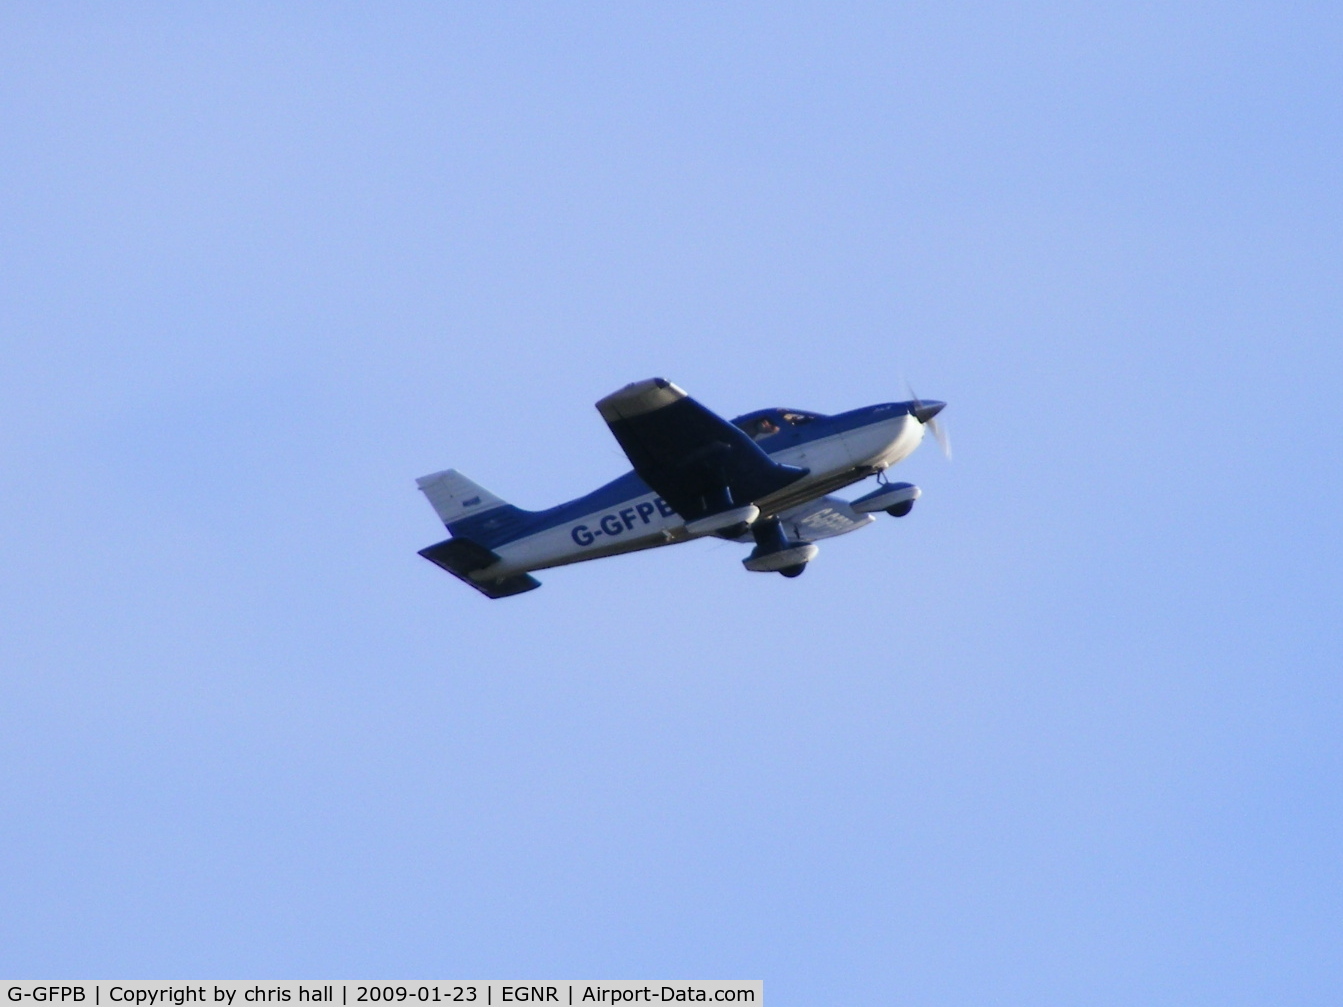 G-GFPB, 2000 Piper PA-28-181 Cherokee Archer III C/N 28-43409, departing from Hawarden